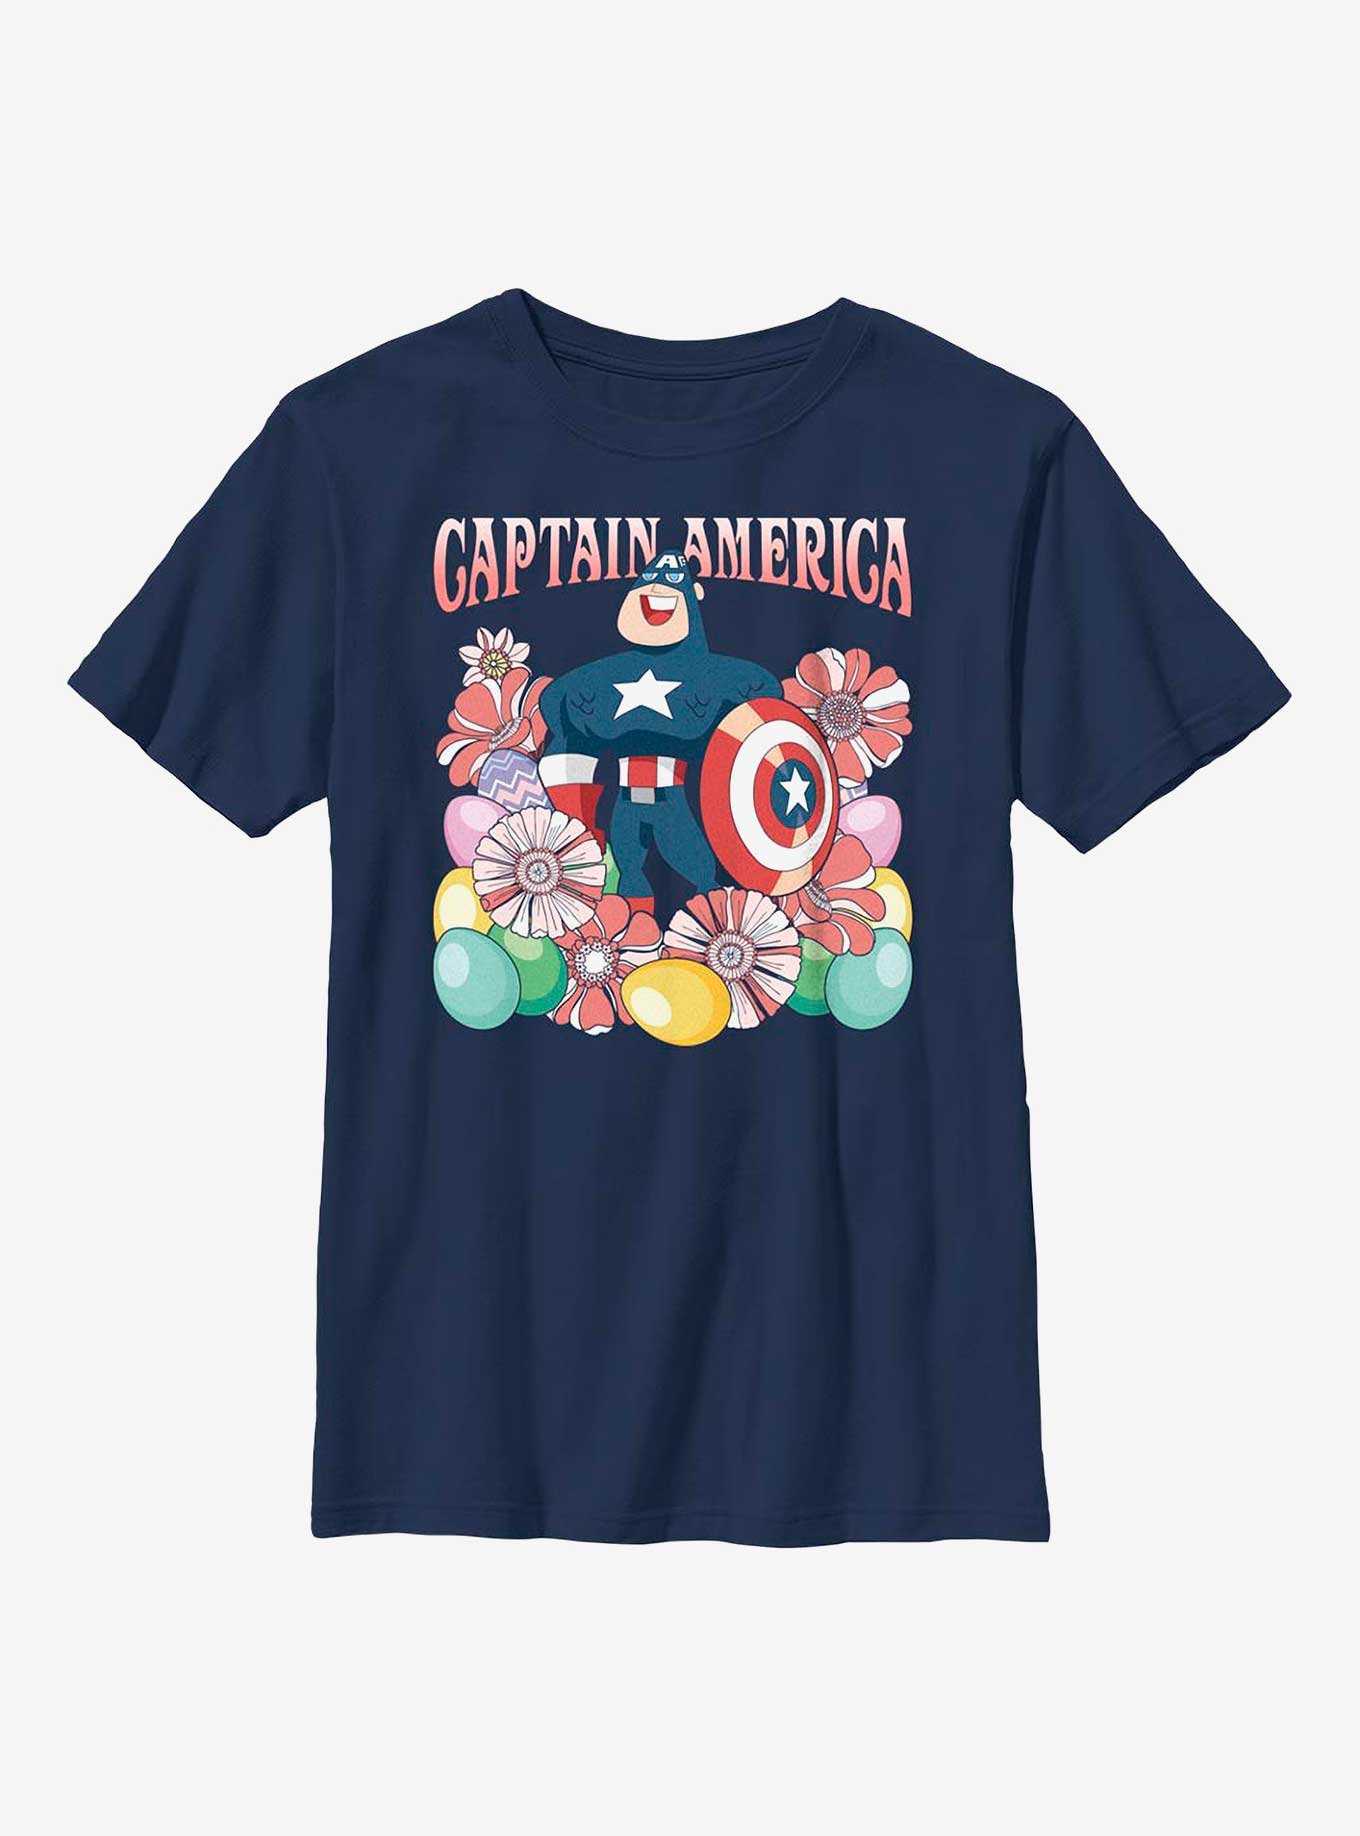 Marvel Captain America Collecting Eggs Youth T-Shirt, , hi-res